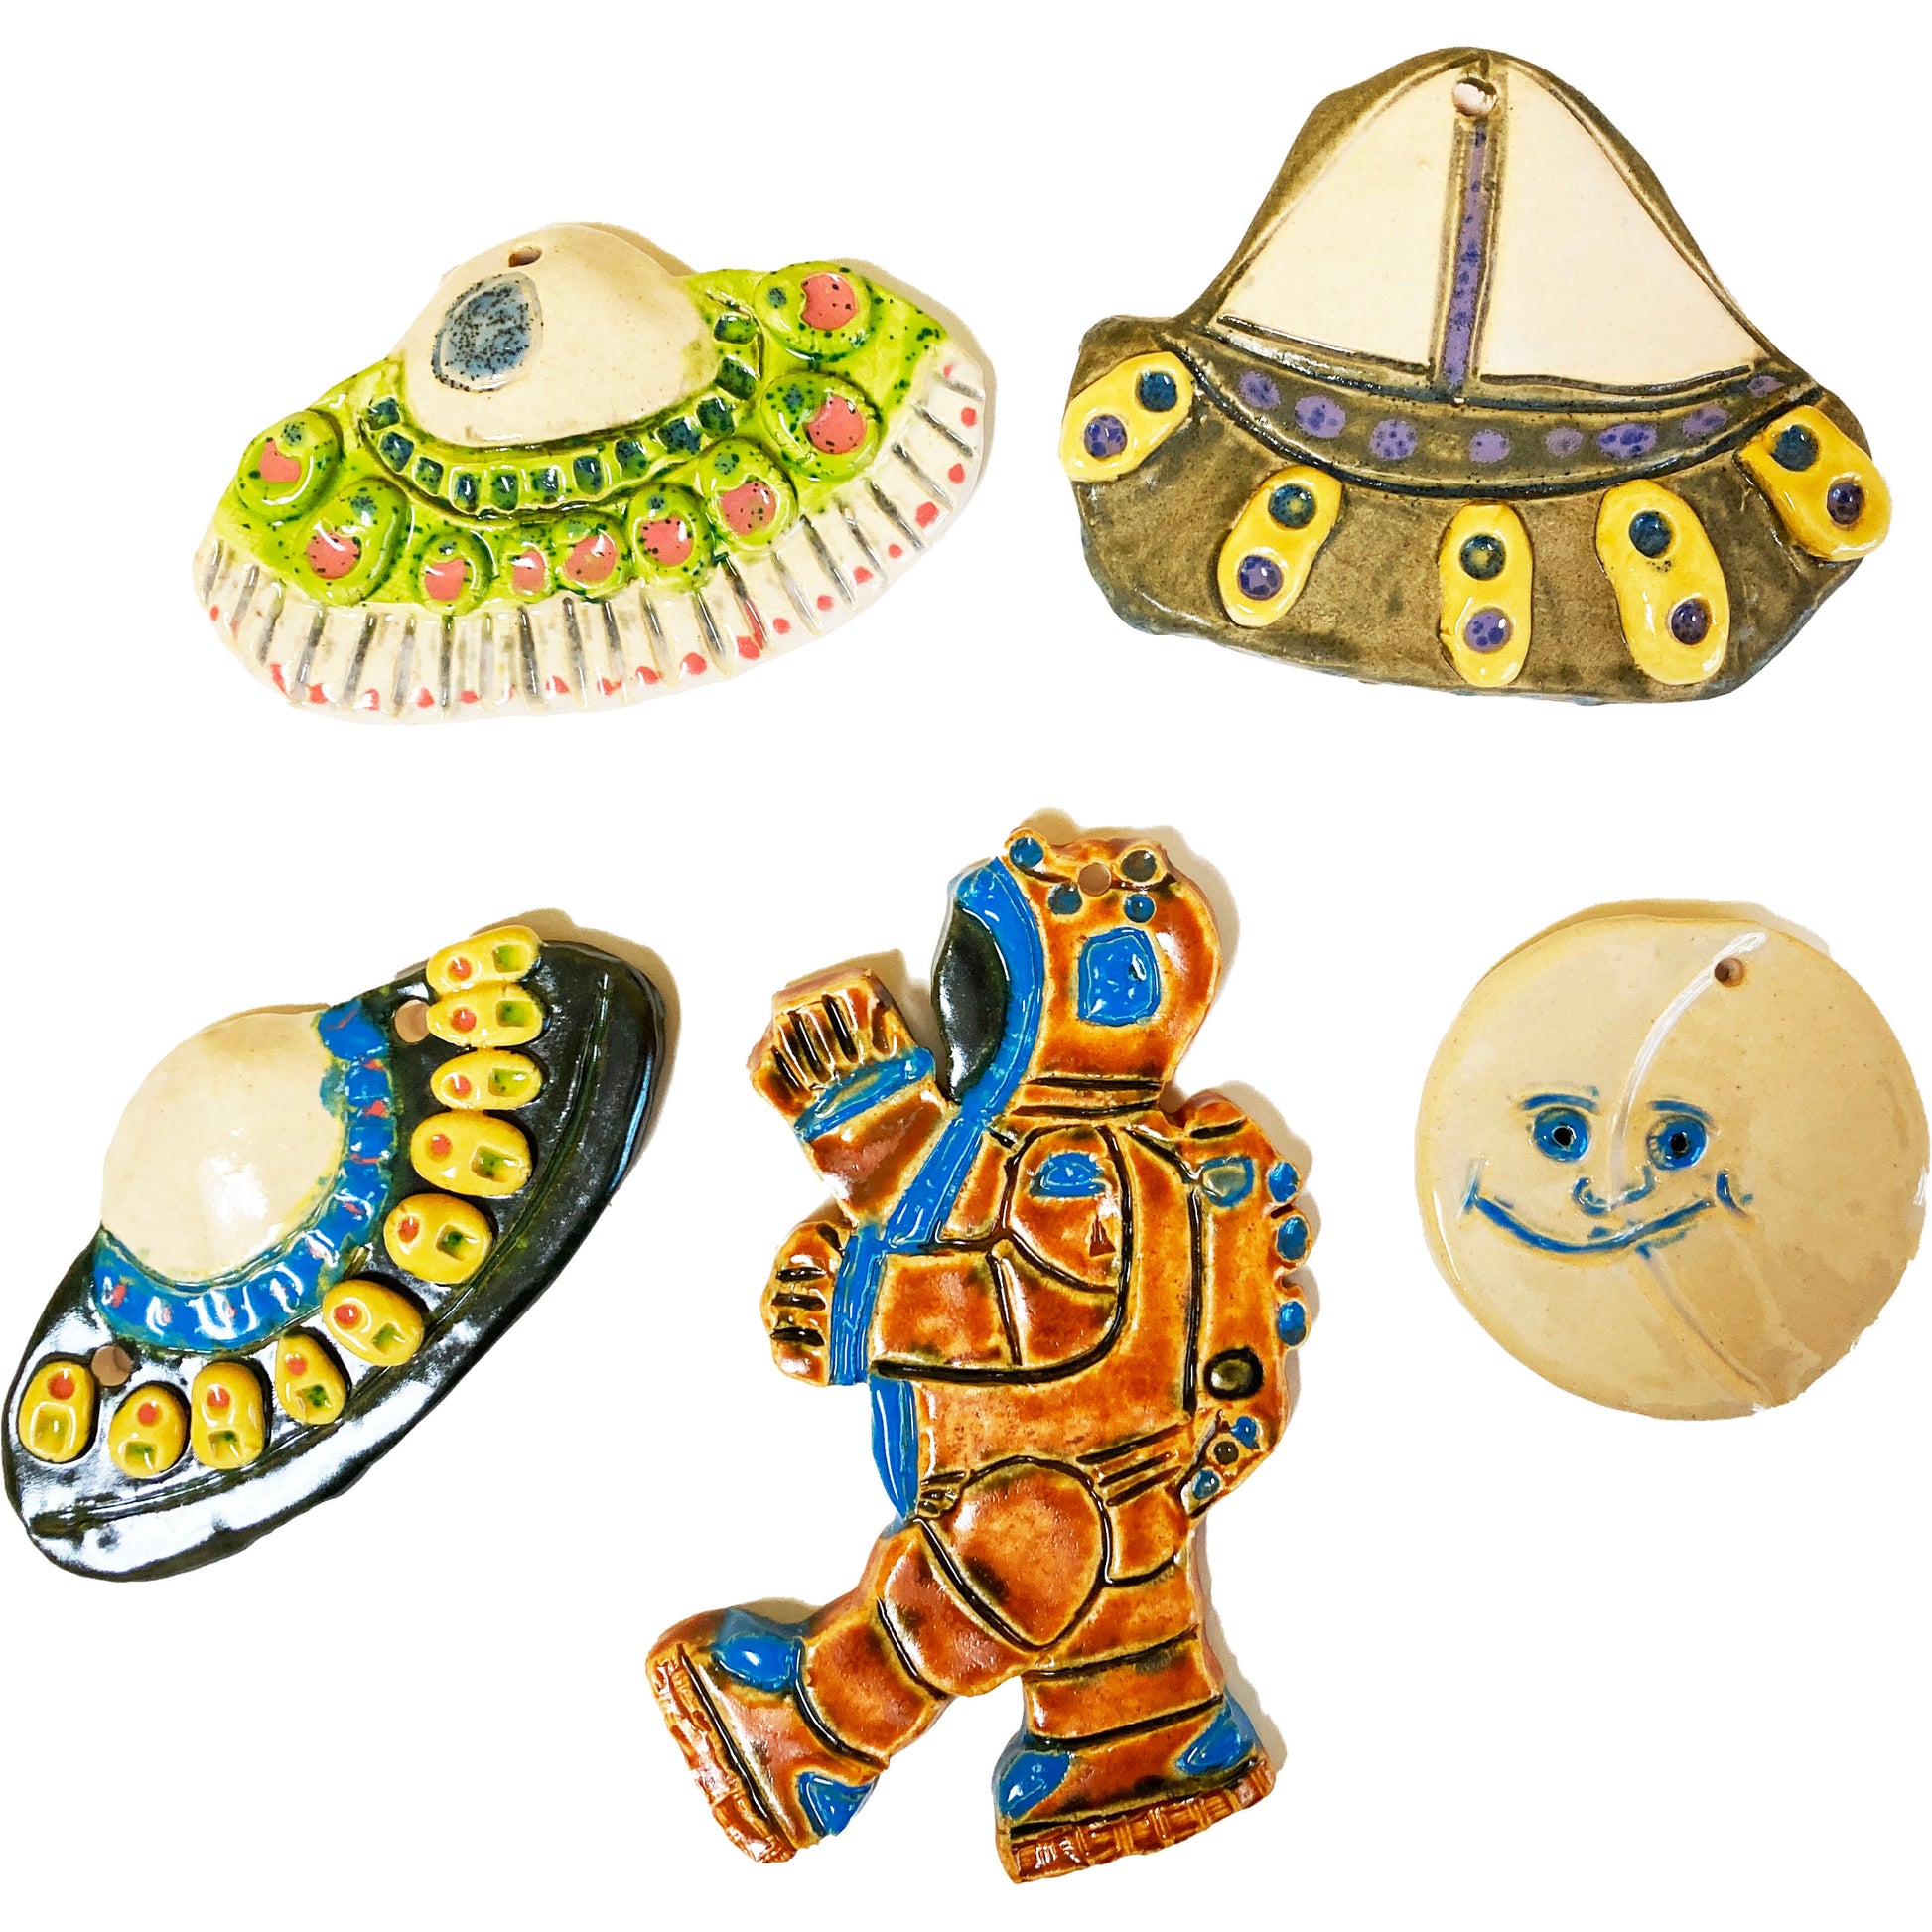 WATCH Resources Art Guild - Ceramic Arts Handmade Clay Crafts Glazed Space Ship 5-inch x 4-inch by Lisa Uptain